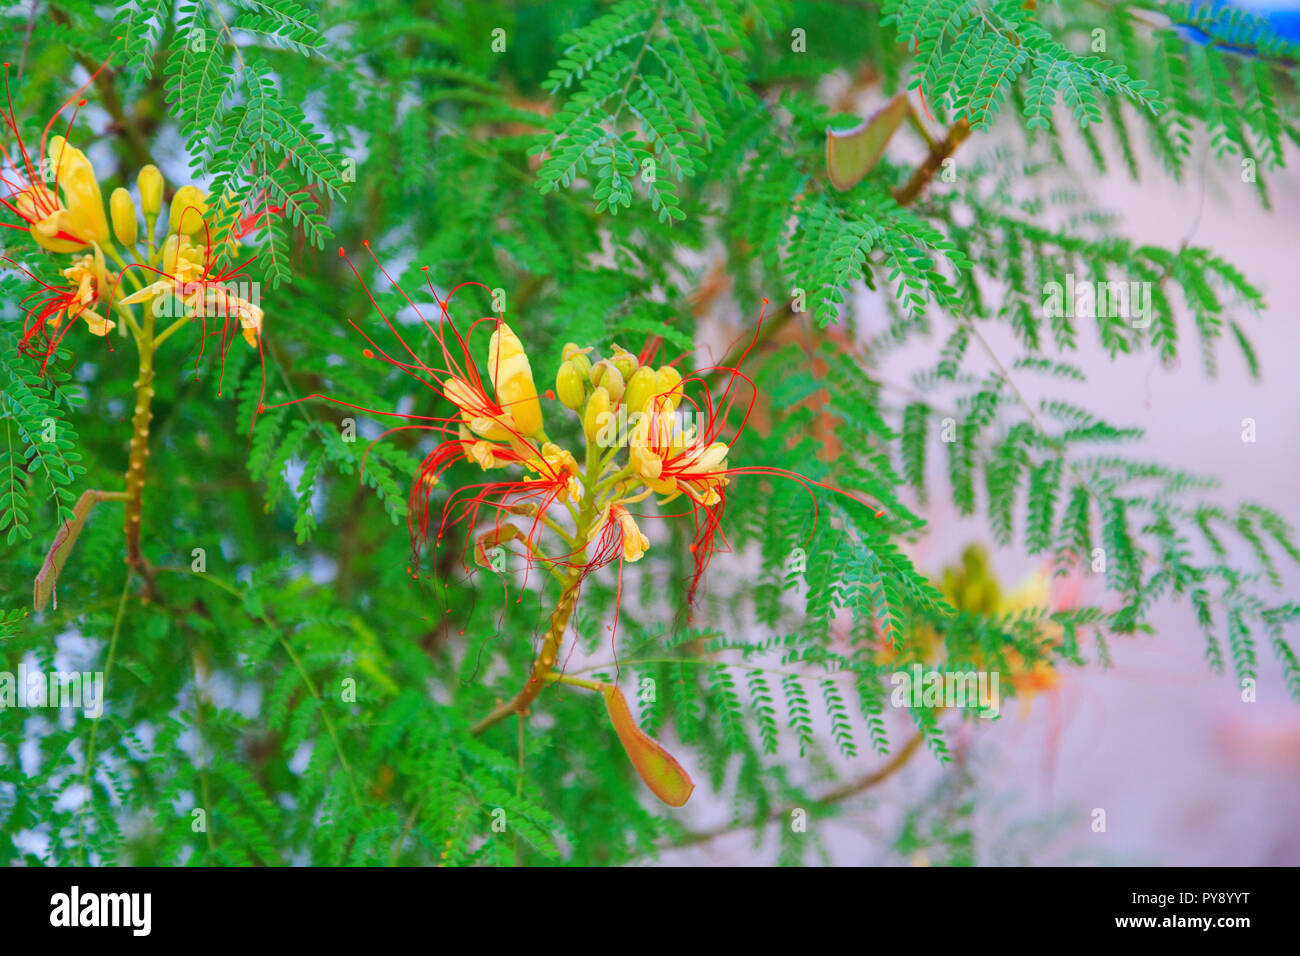 bird of paradise shrub or Erythrostemon gilliesii. Bright yellow red flowers on the green tree. Floral background Stock Photo